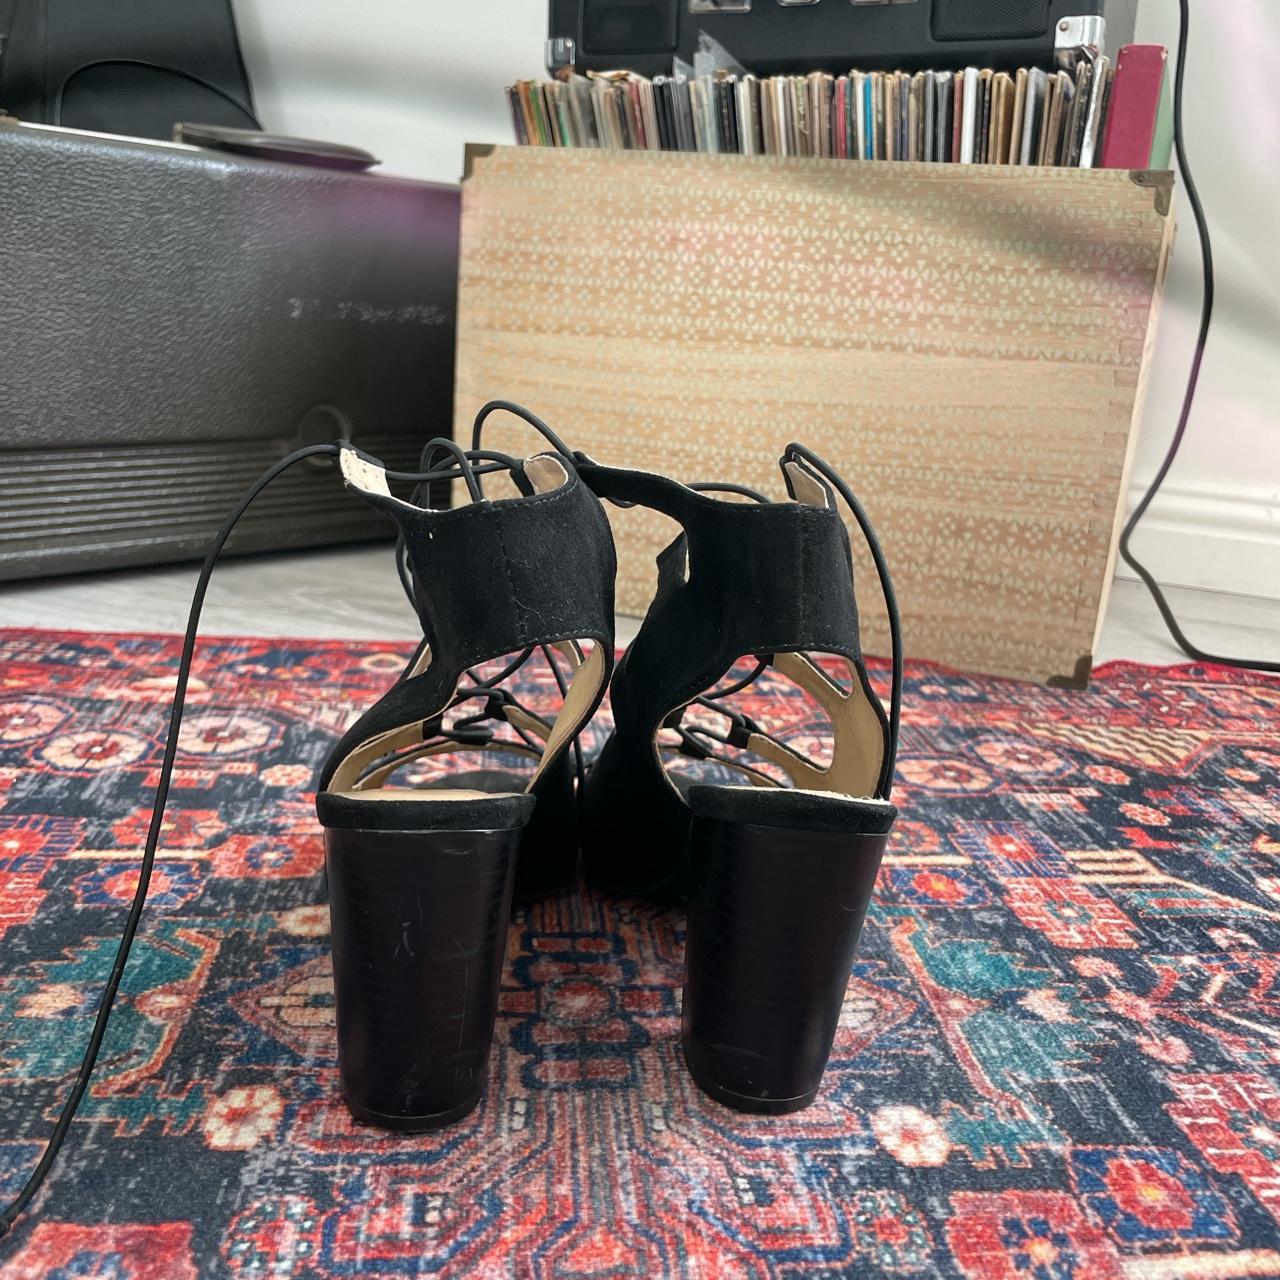 Chinese Laundry Women's Black Courts | Depop